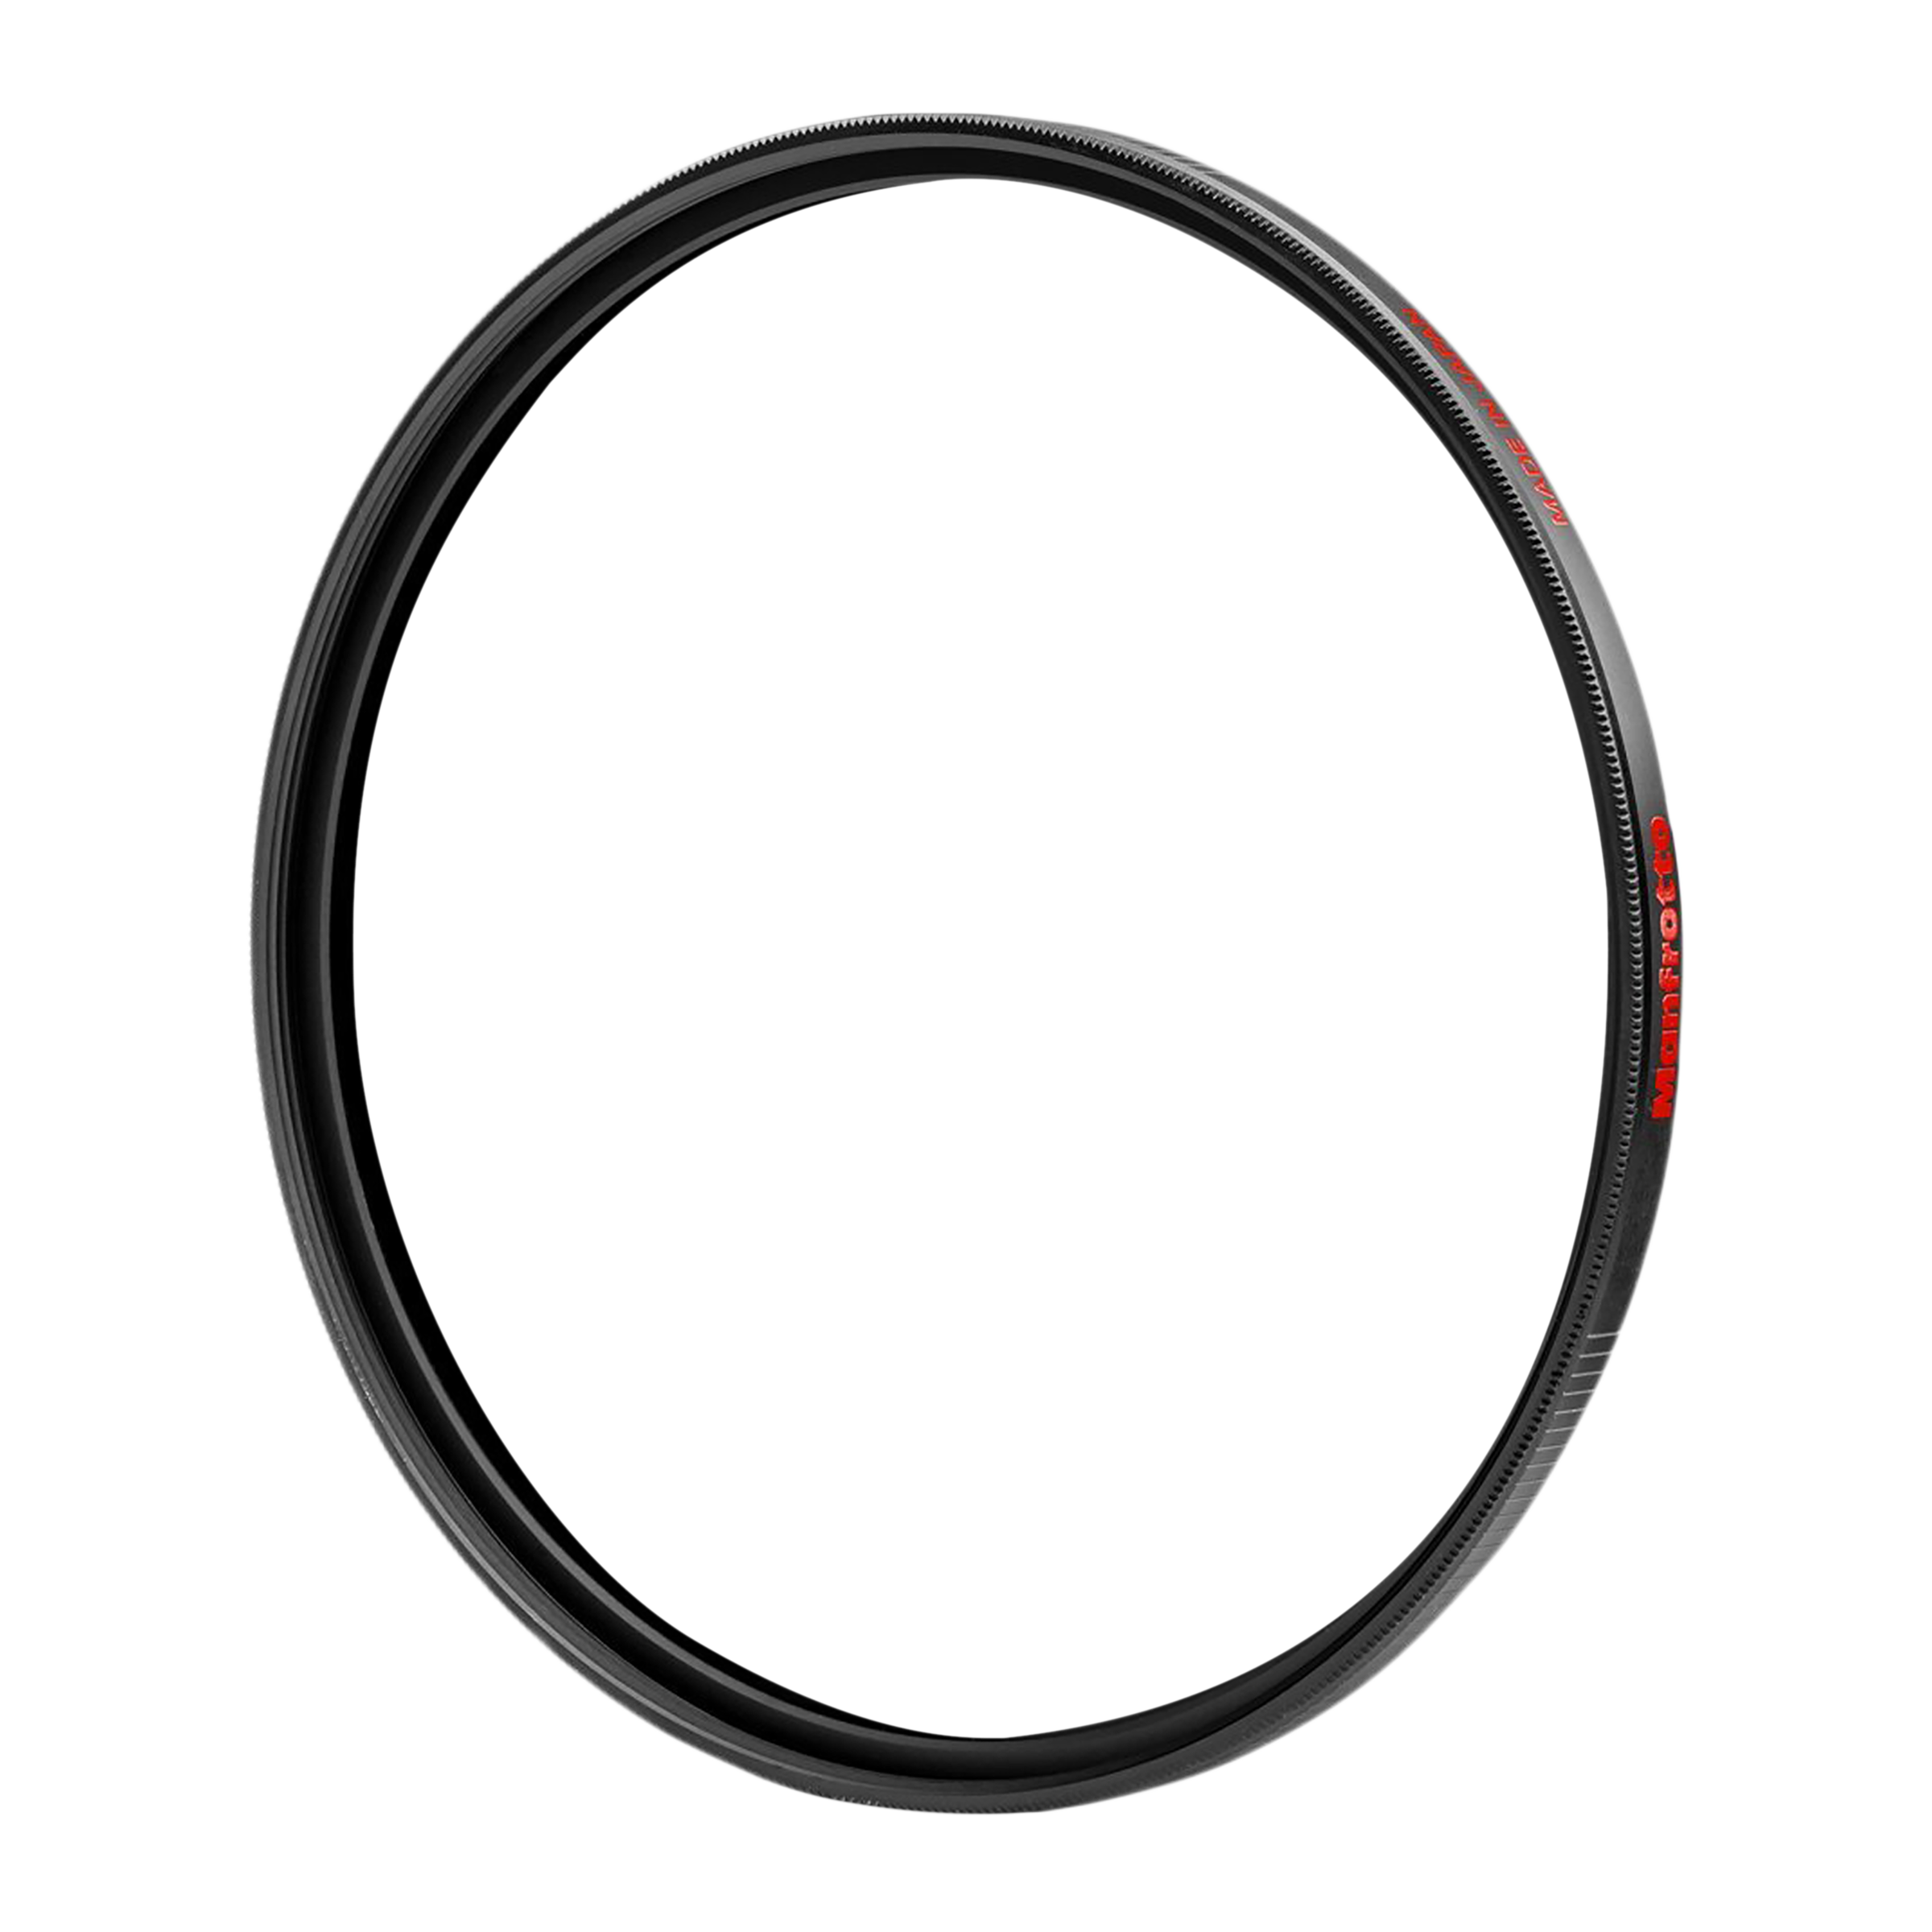 Manfrotto Neutral Density 64 77mm Camera Lens Neutral Density Filter (16 Layers Multi-Coating)